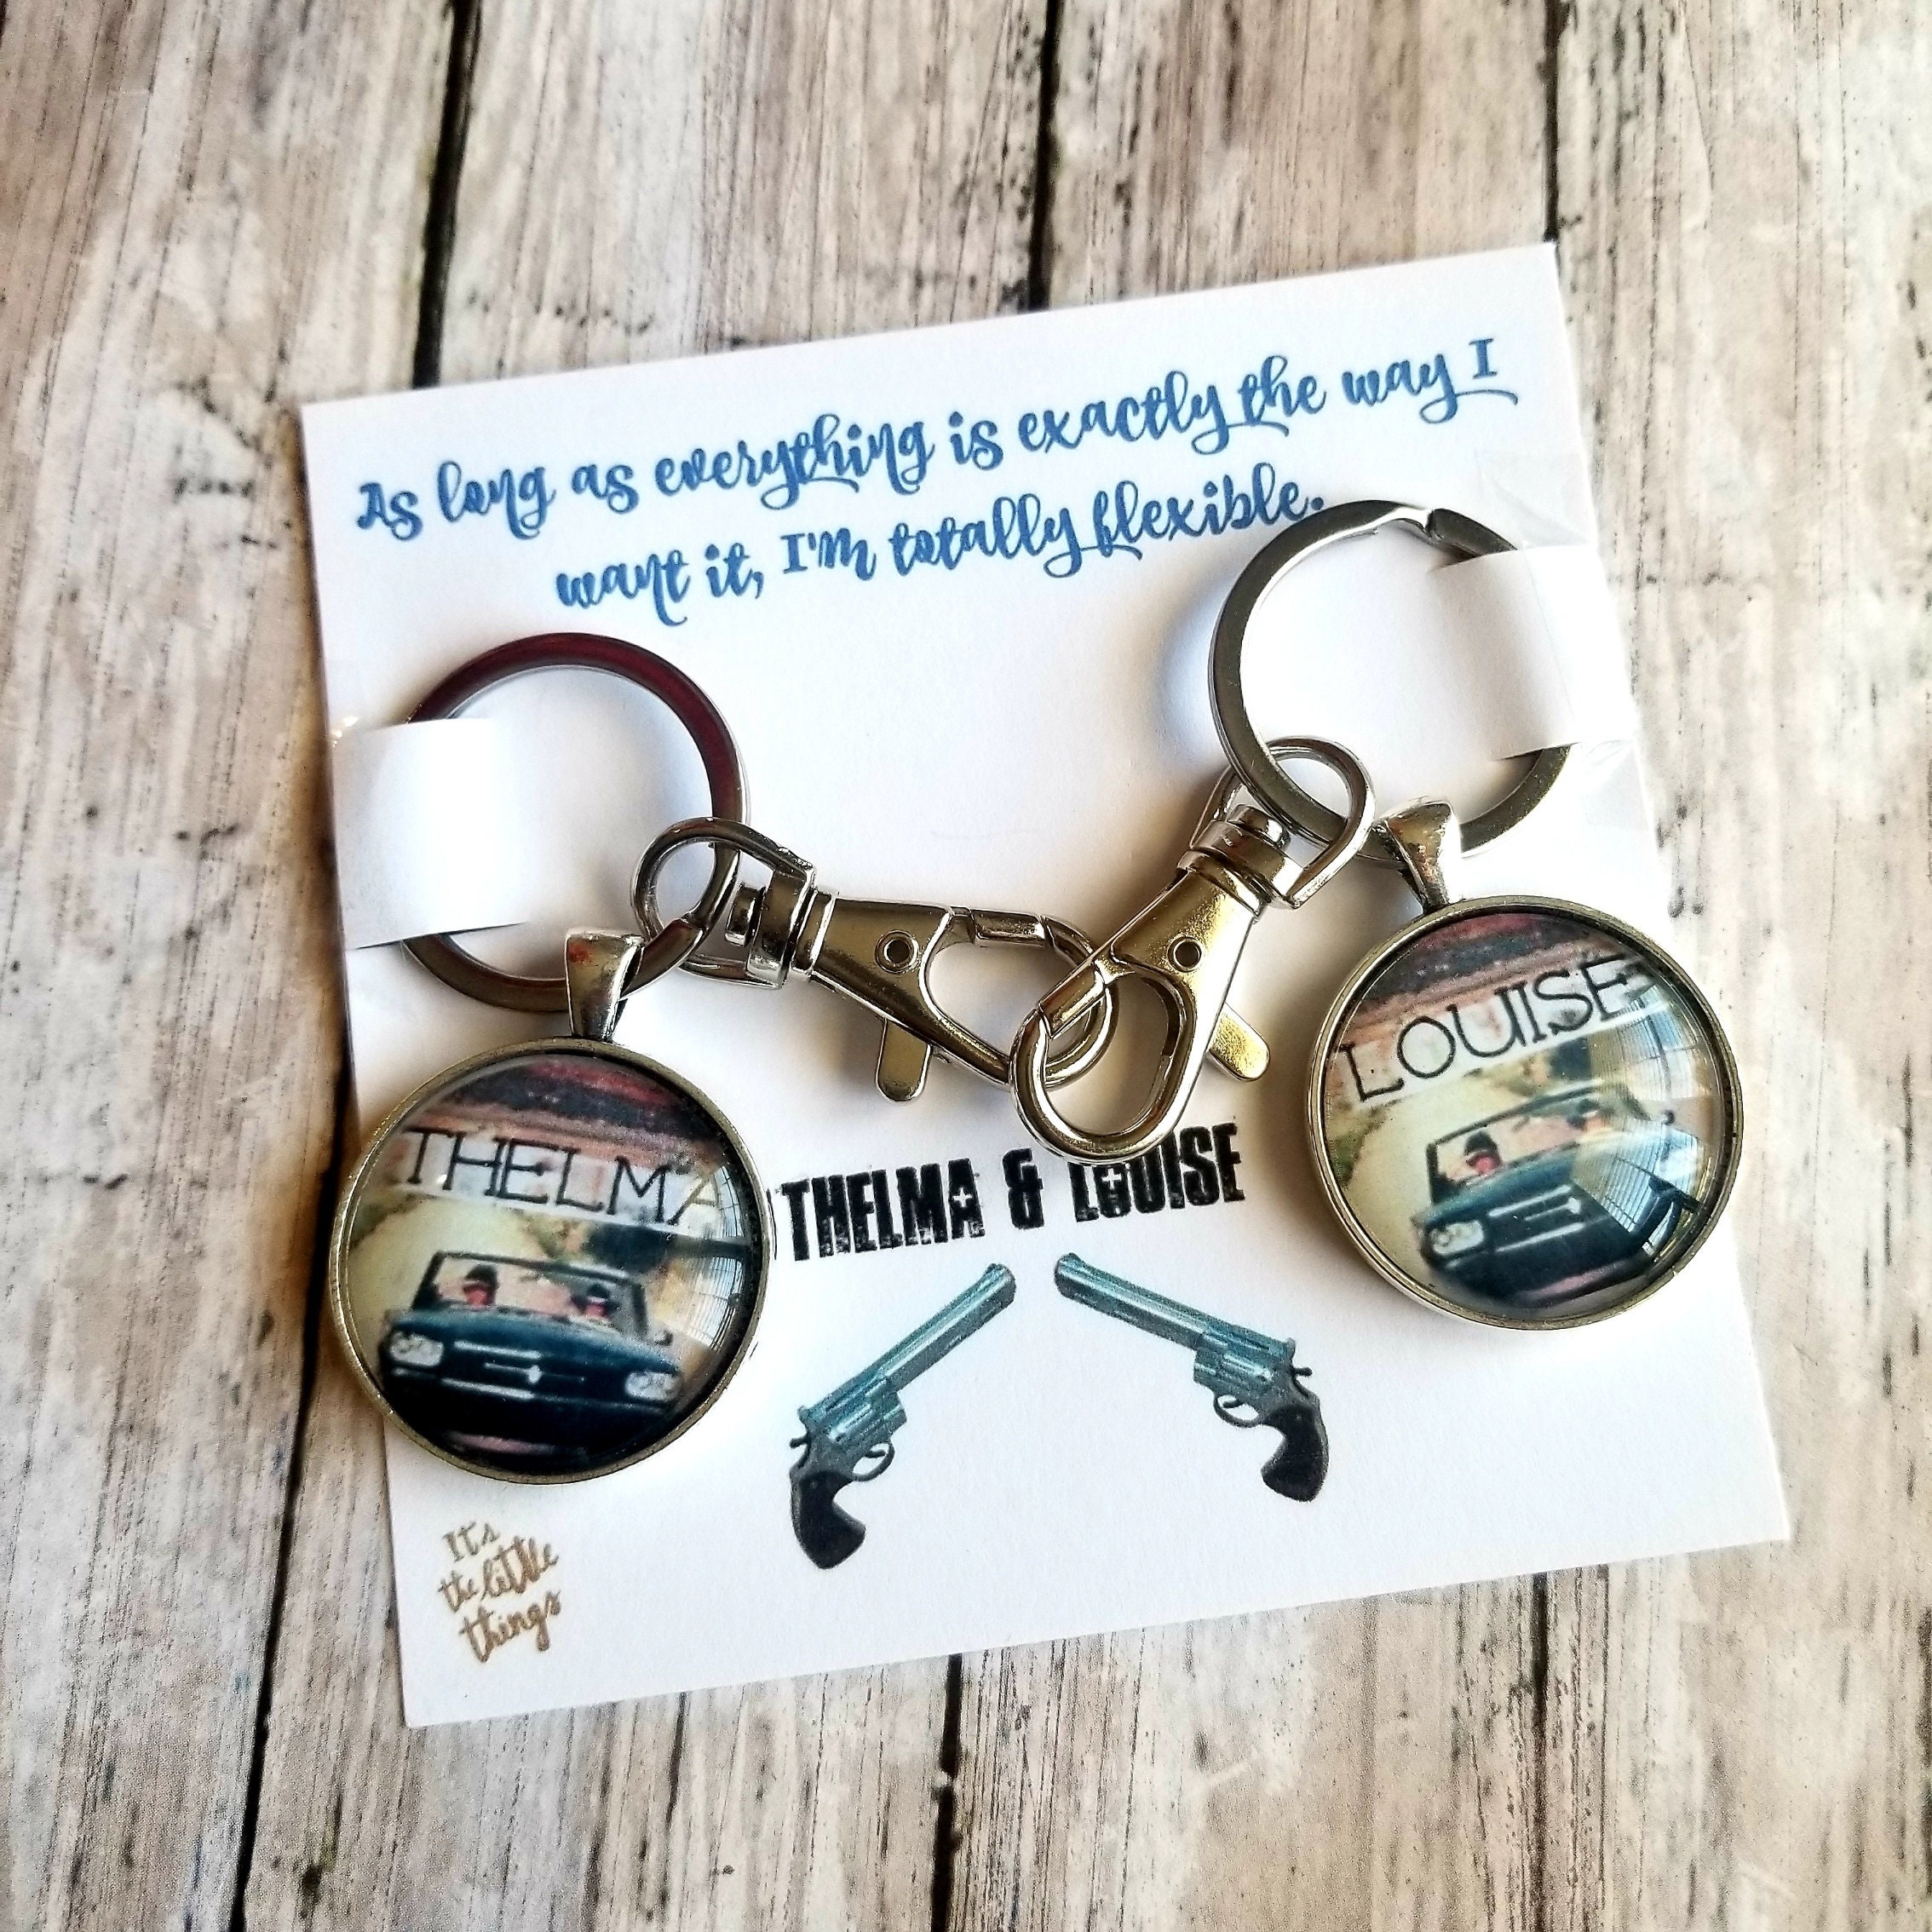 2pc Thelma and Louise Friendship Key Chains Rings Partners in Crime Best  Friend